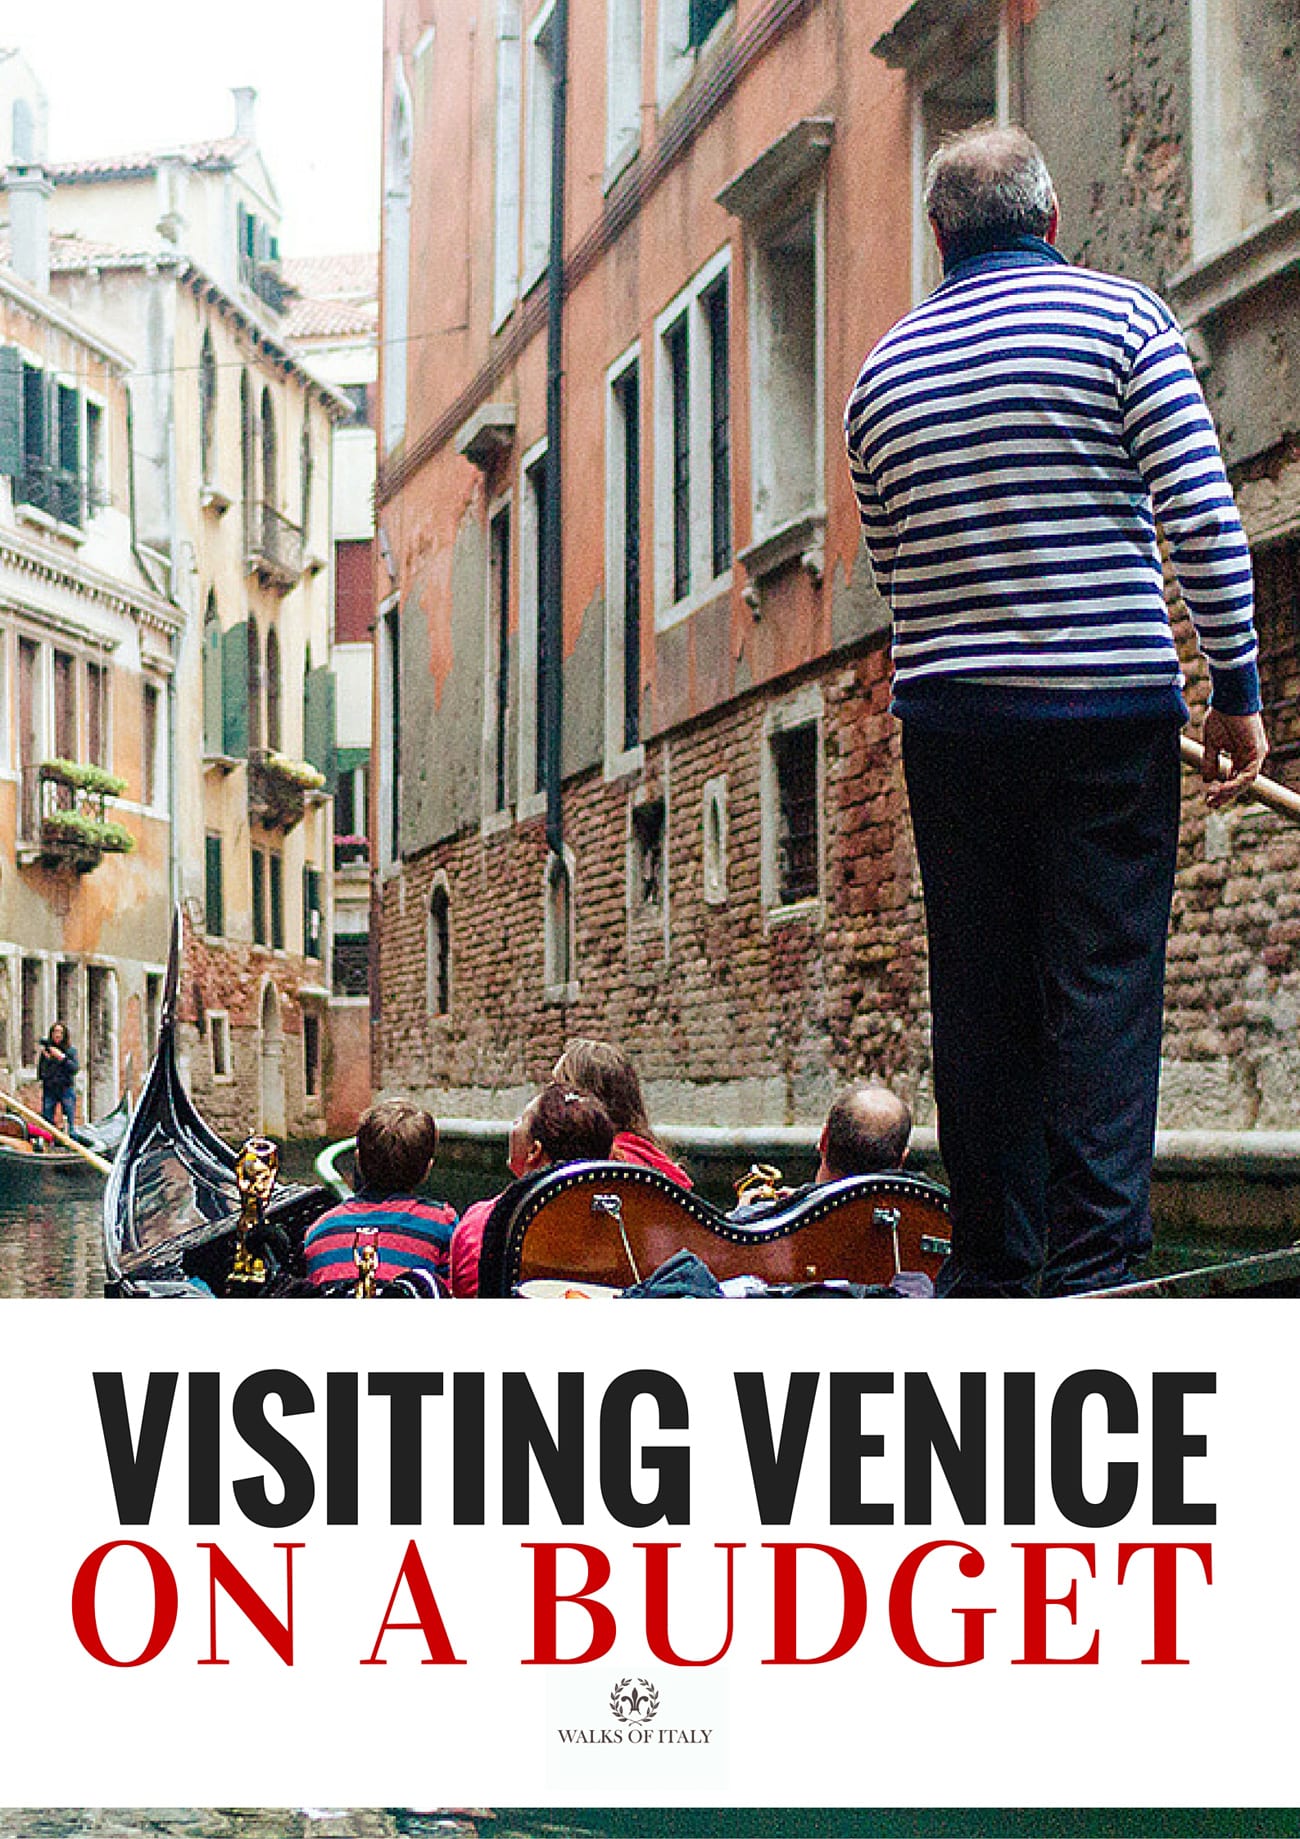 A Venetian gondoliere can be expensive. Learn the secrets of visiting Venice without getting ripped off at the Walks of Italy blog. 